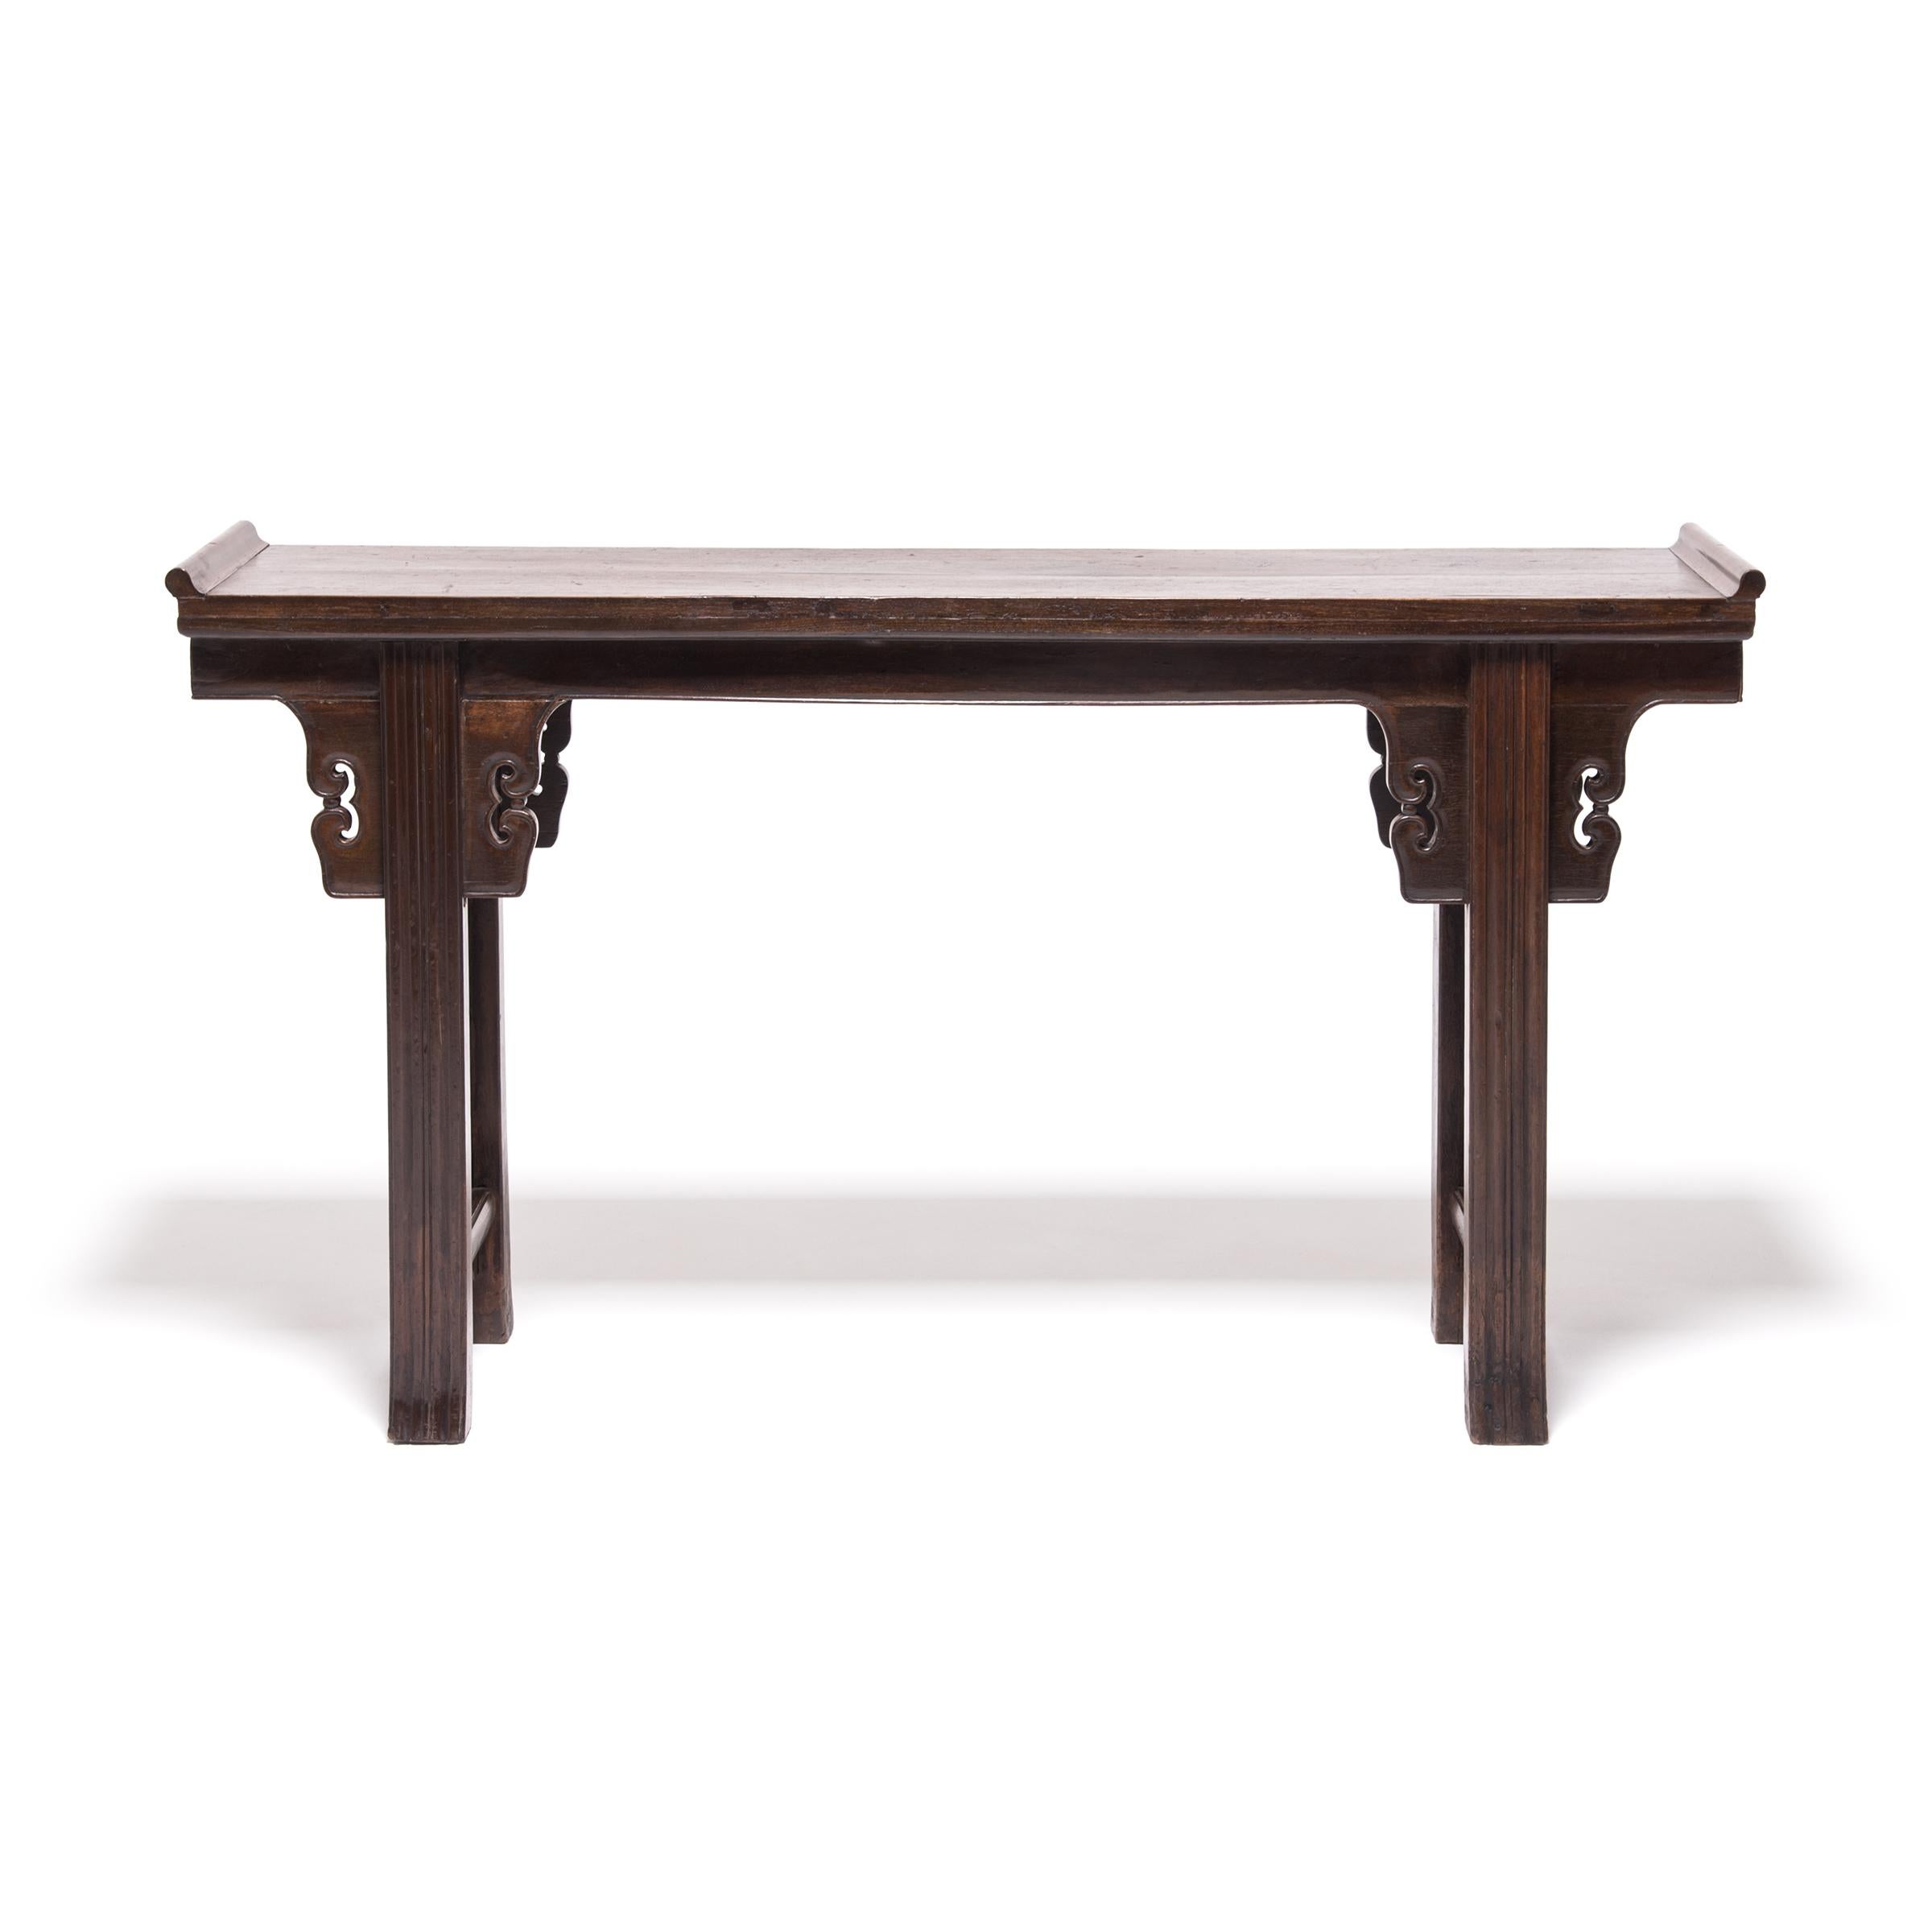 This elegant console table was made 150 years ago in China’s Shanxi province and likely served as a family’s altar where they paid respects to revered ancestors. The altar table is crafted of fine hardwood with carved spandrels, everted ends,